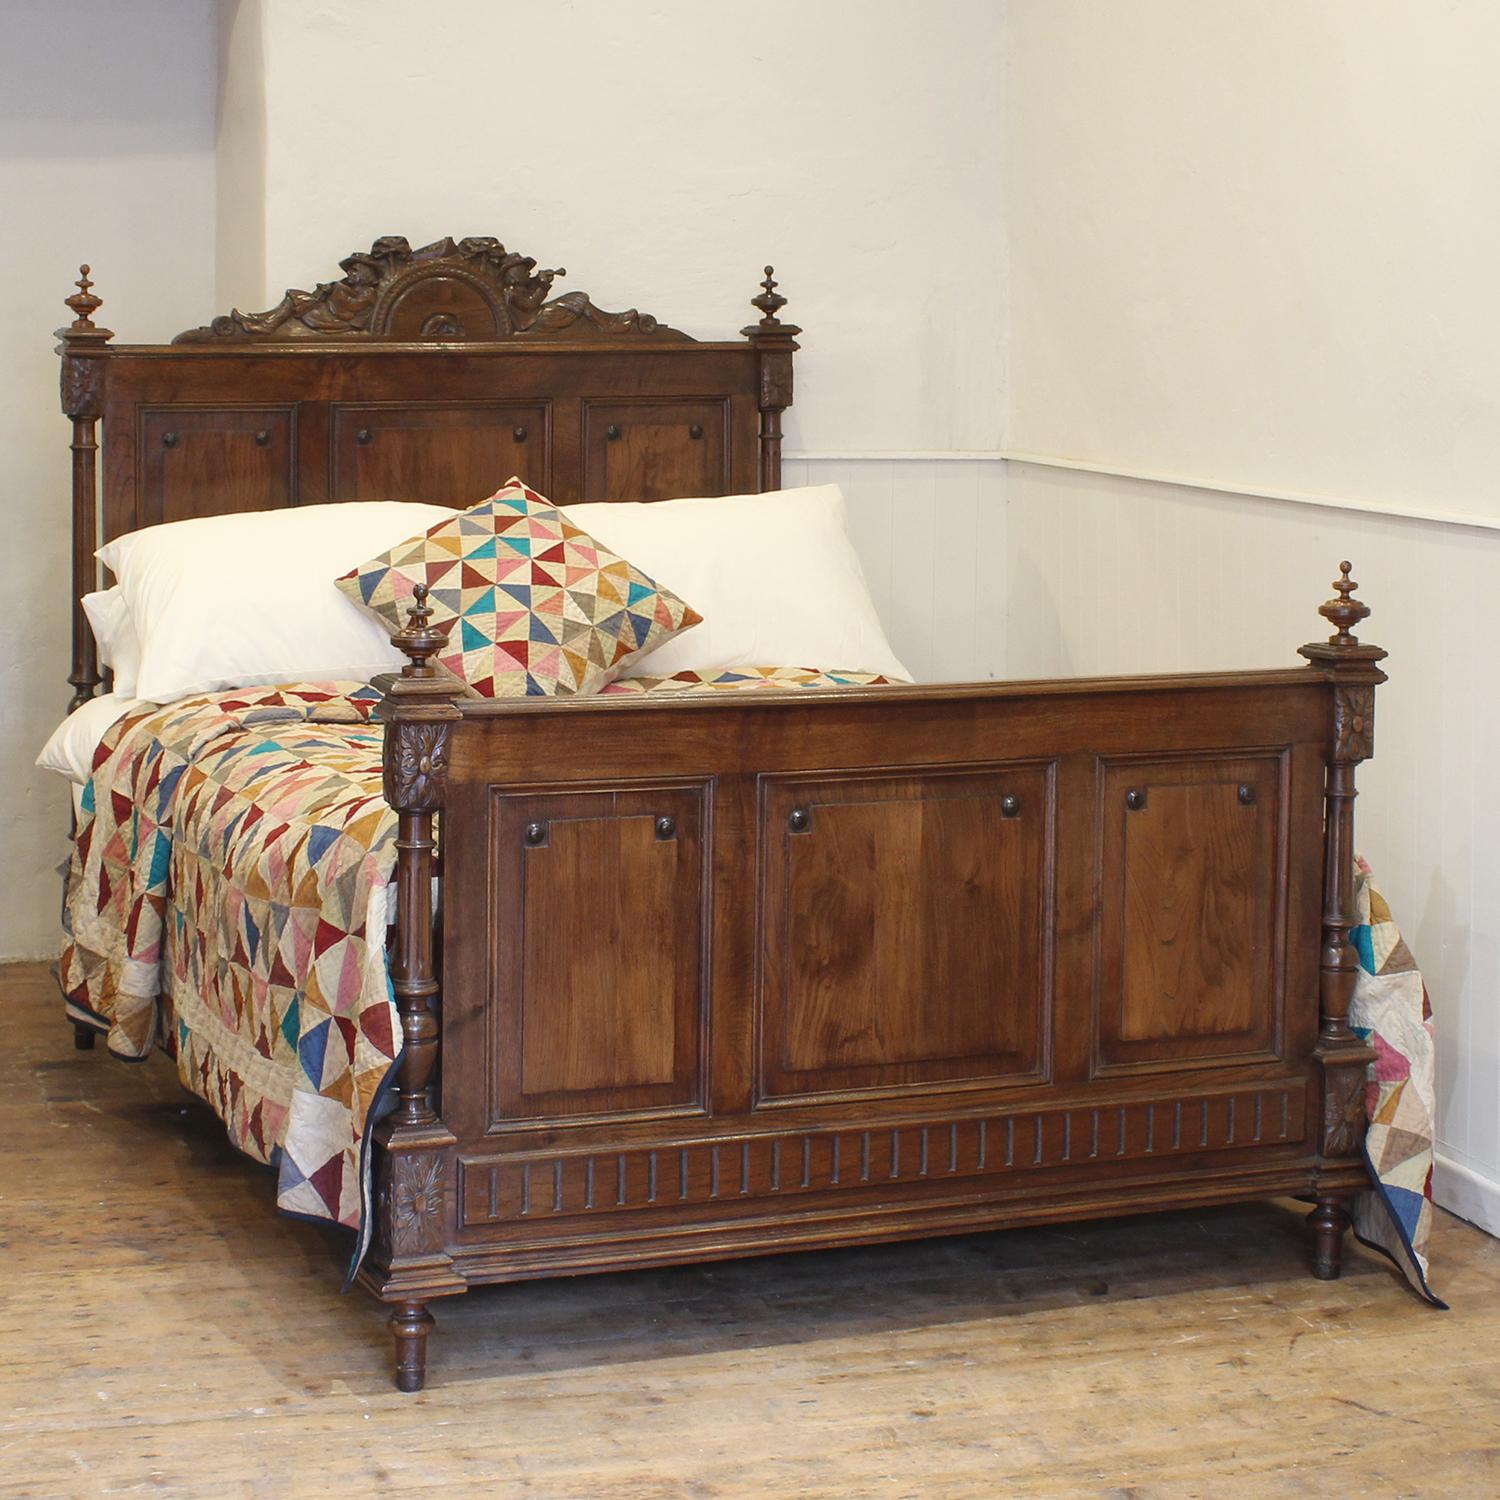 A handsome Breton bed in oak with turned posts and finials, three panel design in head and foot, and ornately carved pediment depicting a rural scene of two reclining musicians.

This bed accepts a standard double, 4ft 6in (54 in), base and mattress